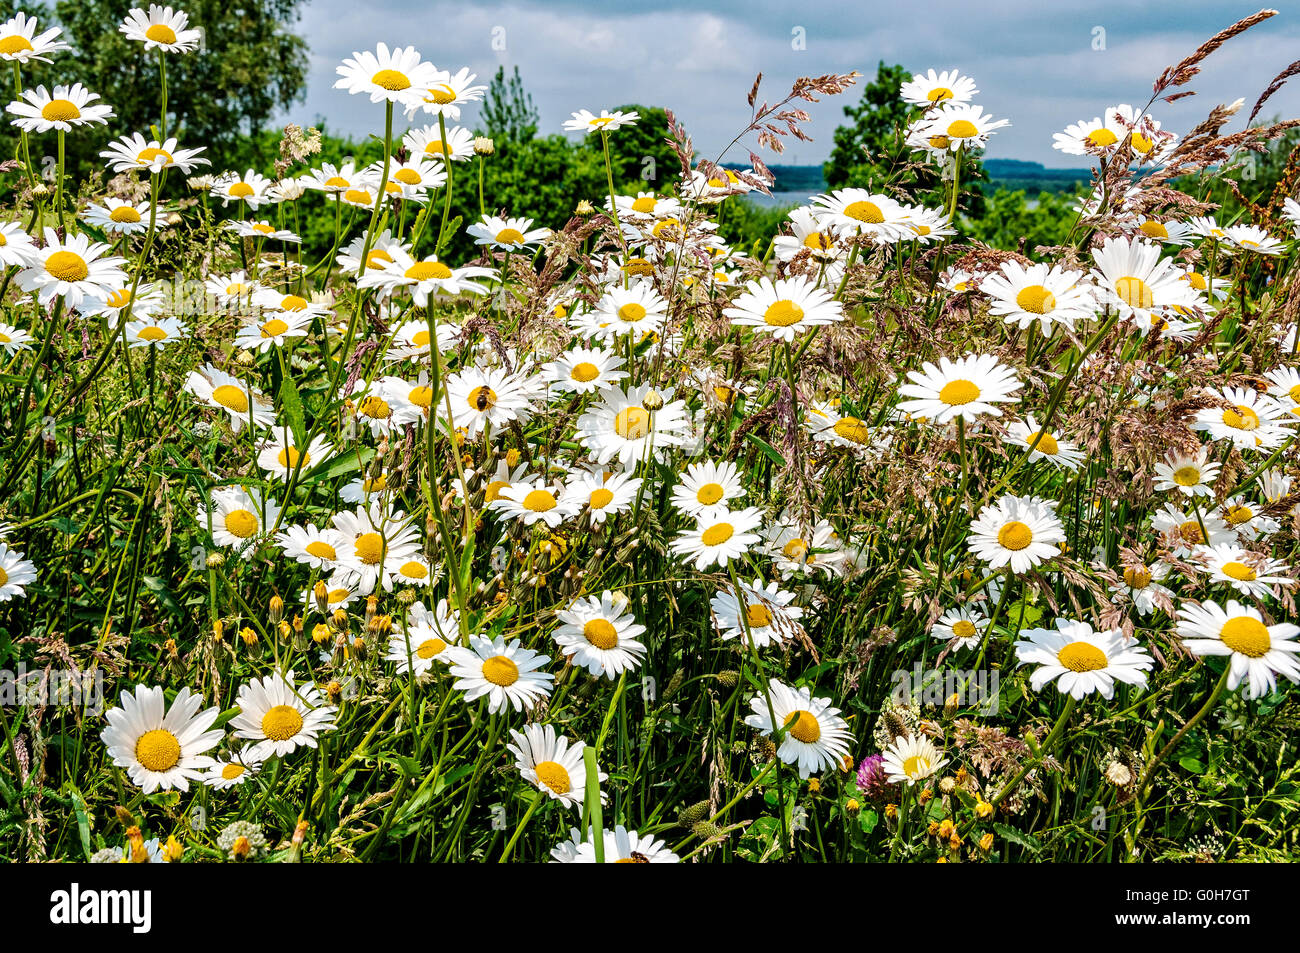 Flower heads of the common daisy brighten a meadow with their white petals and yellow centres amongst the neighbouring plants Stock Photo